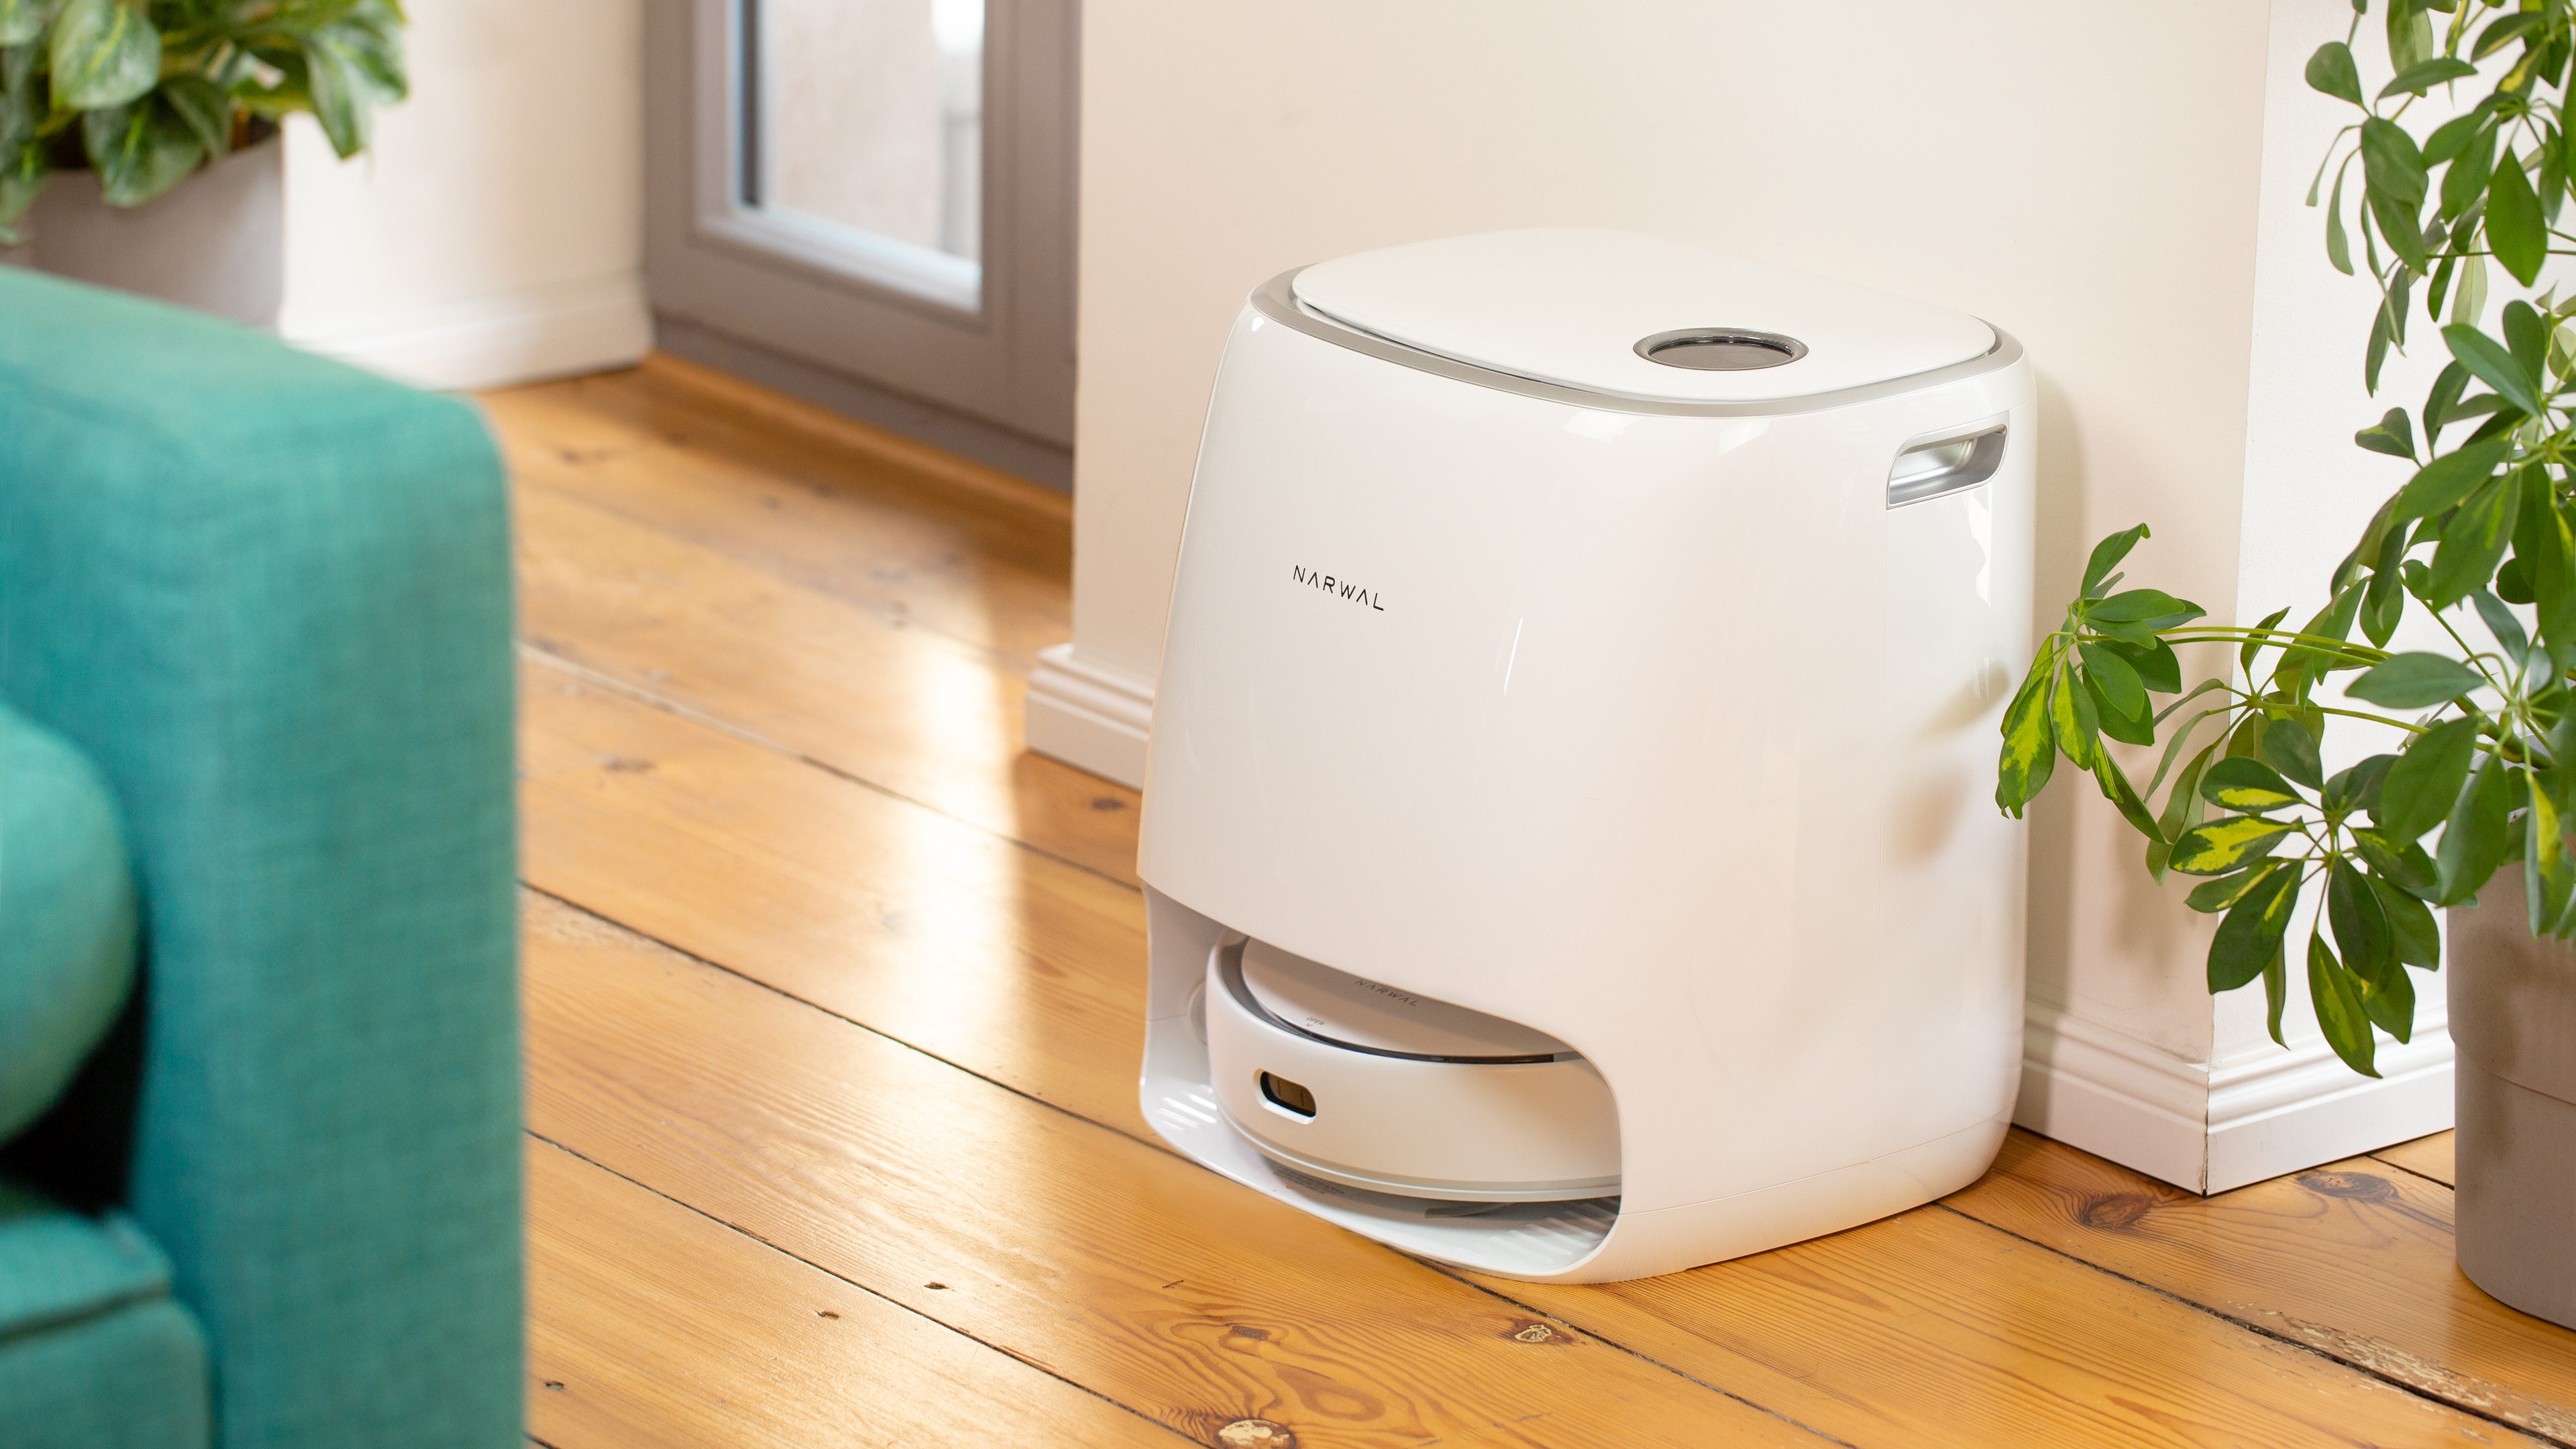 Narwal offers the top-of-the-line Freo Robot Vacuum